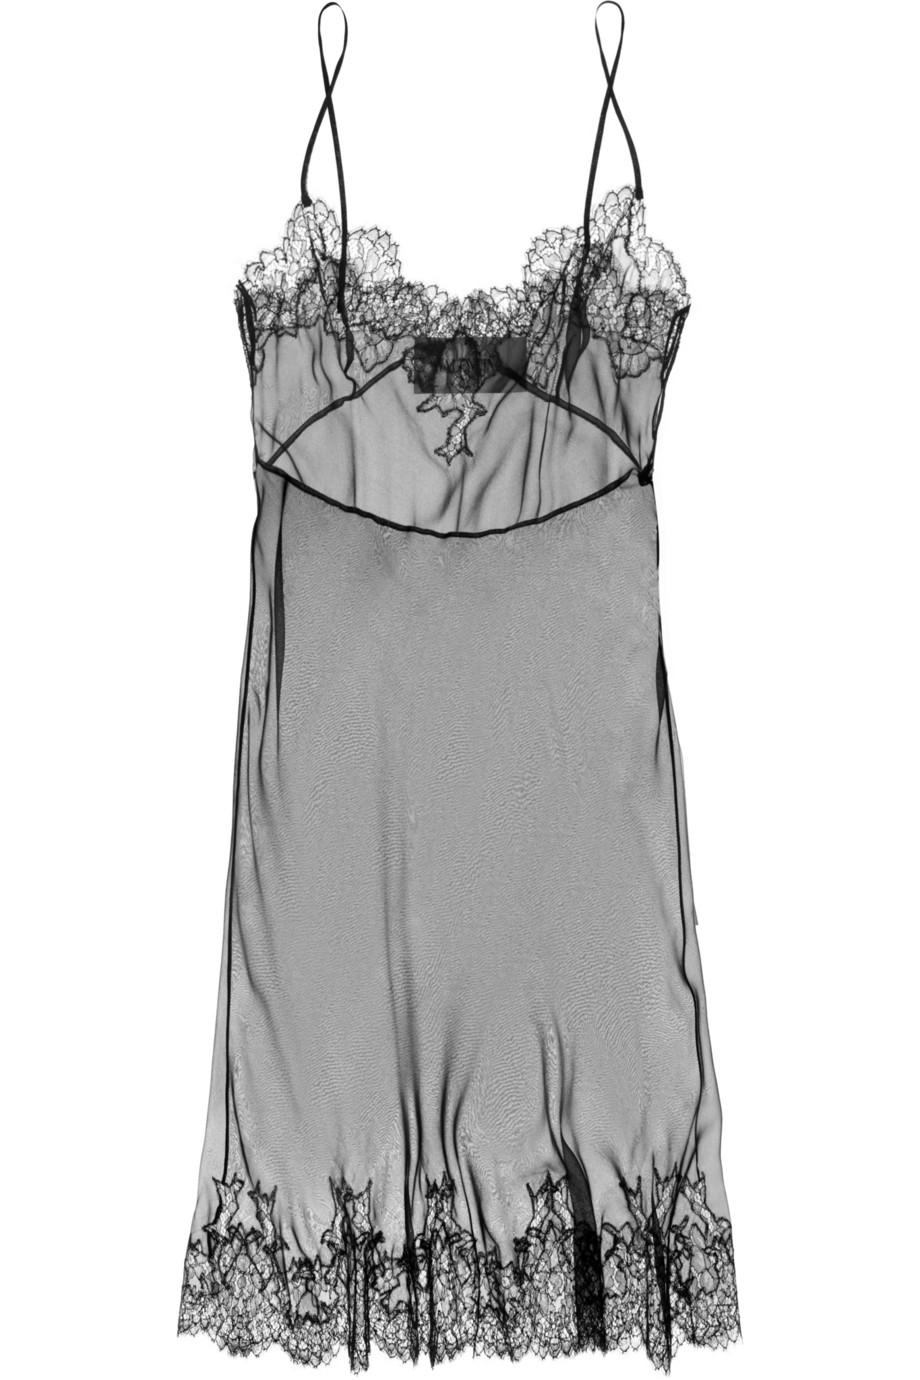 Valentino Lace-Trimmed Silk Chemise in Black - Lyst